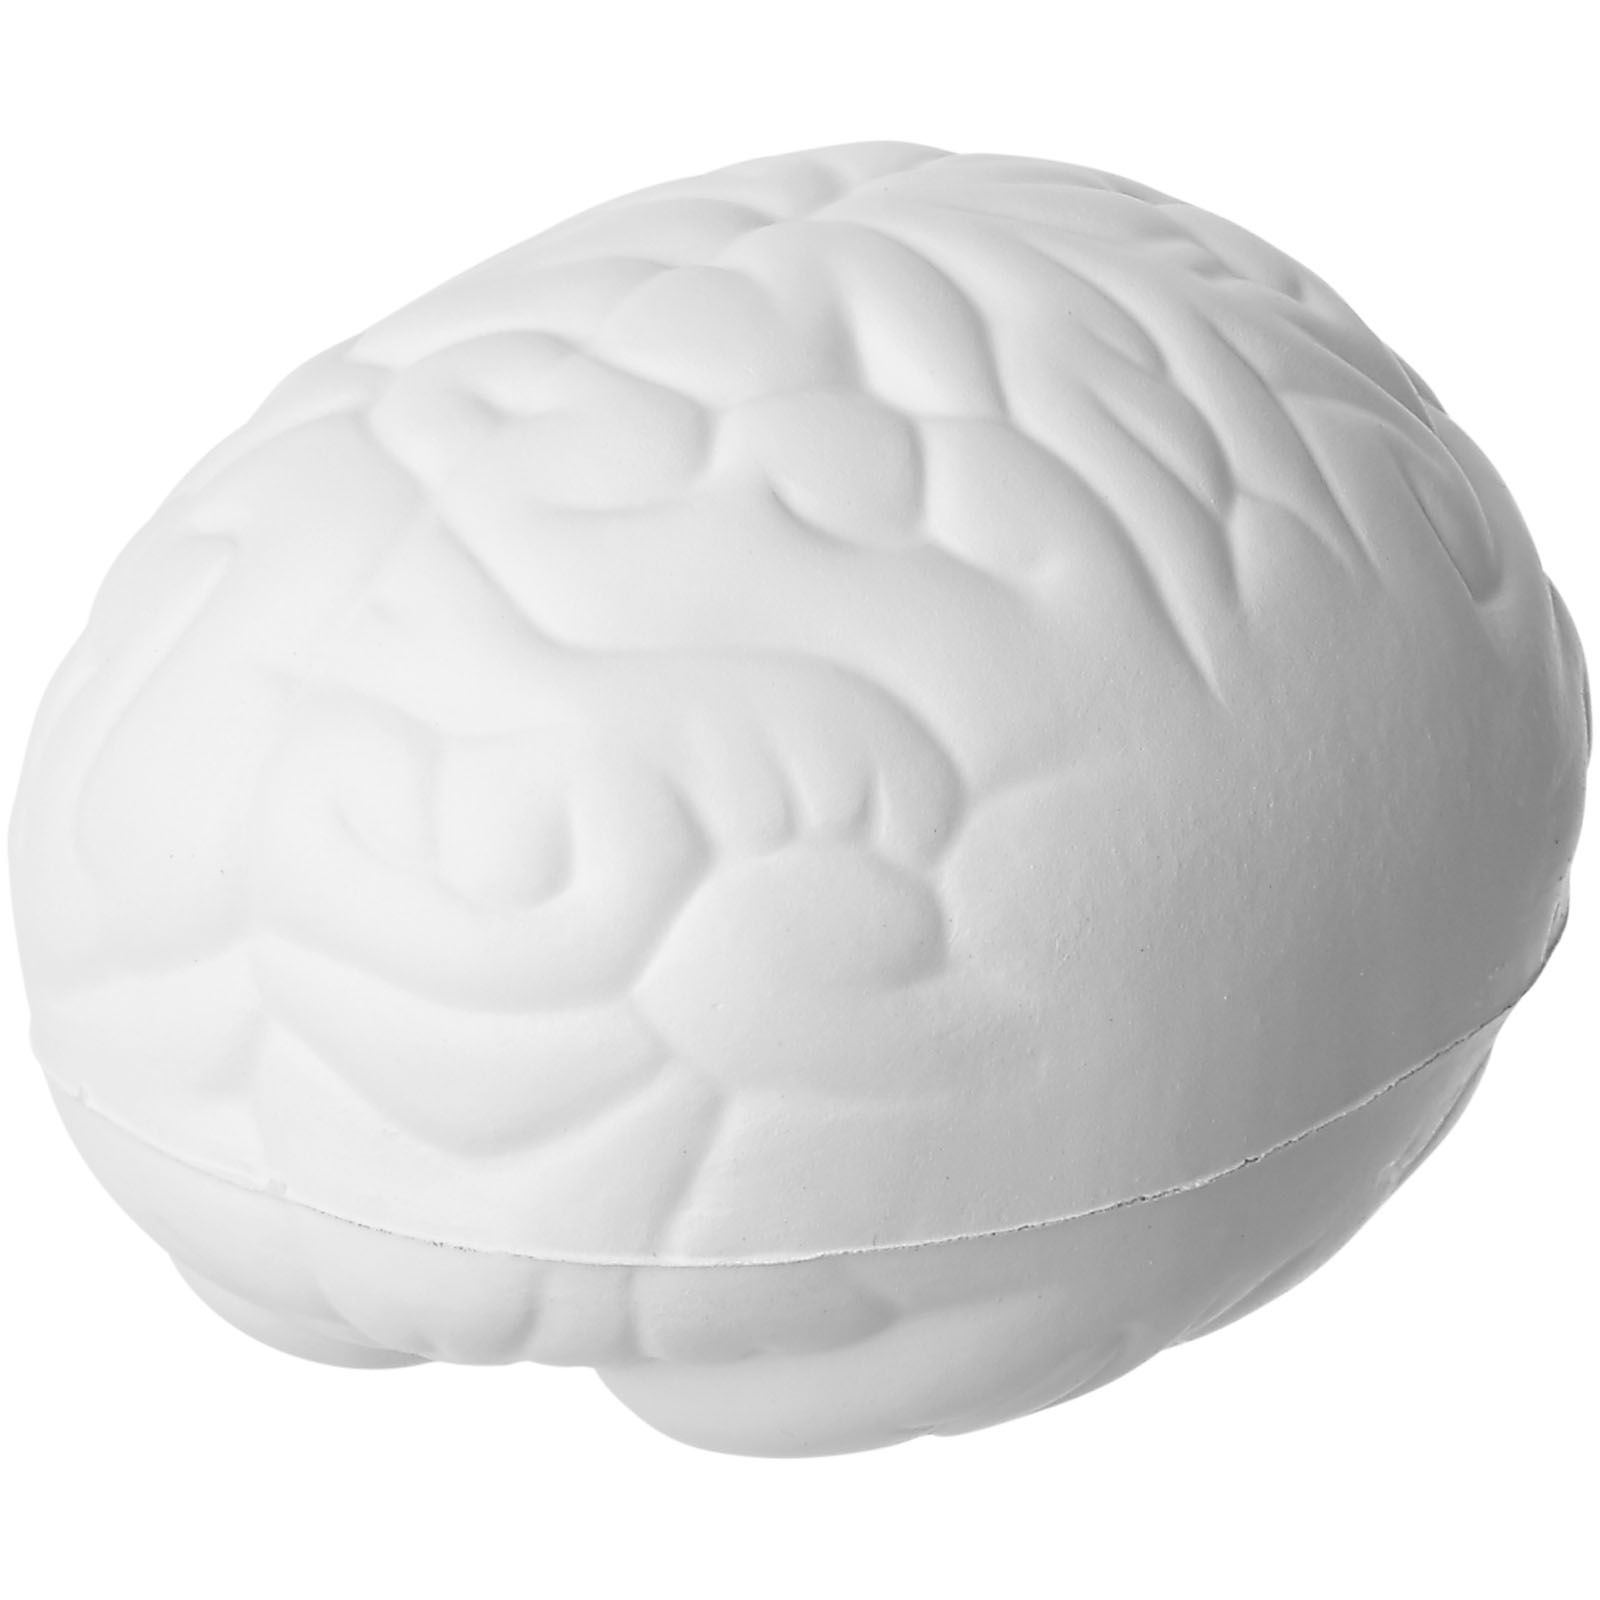 Giveaways - Barrie brain stress reliever